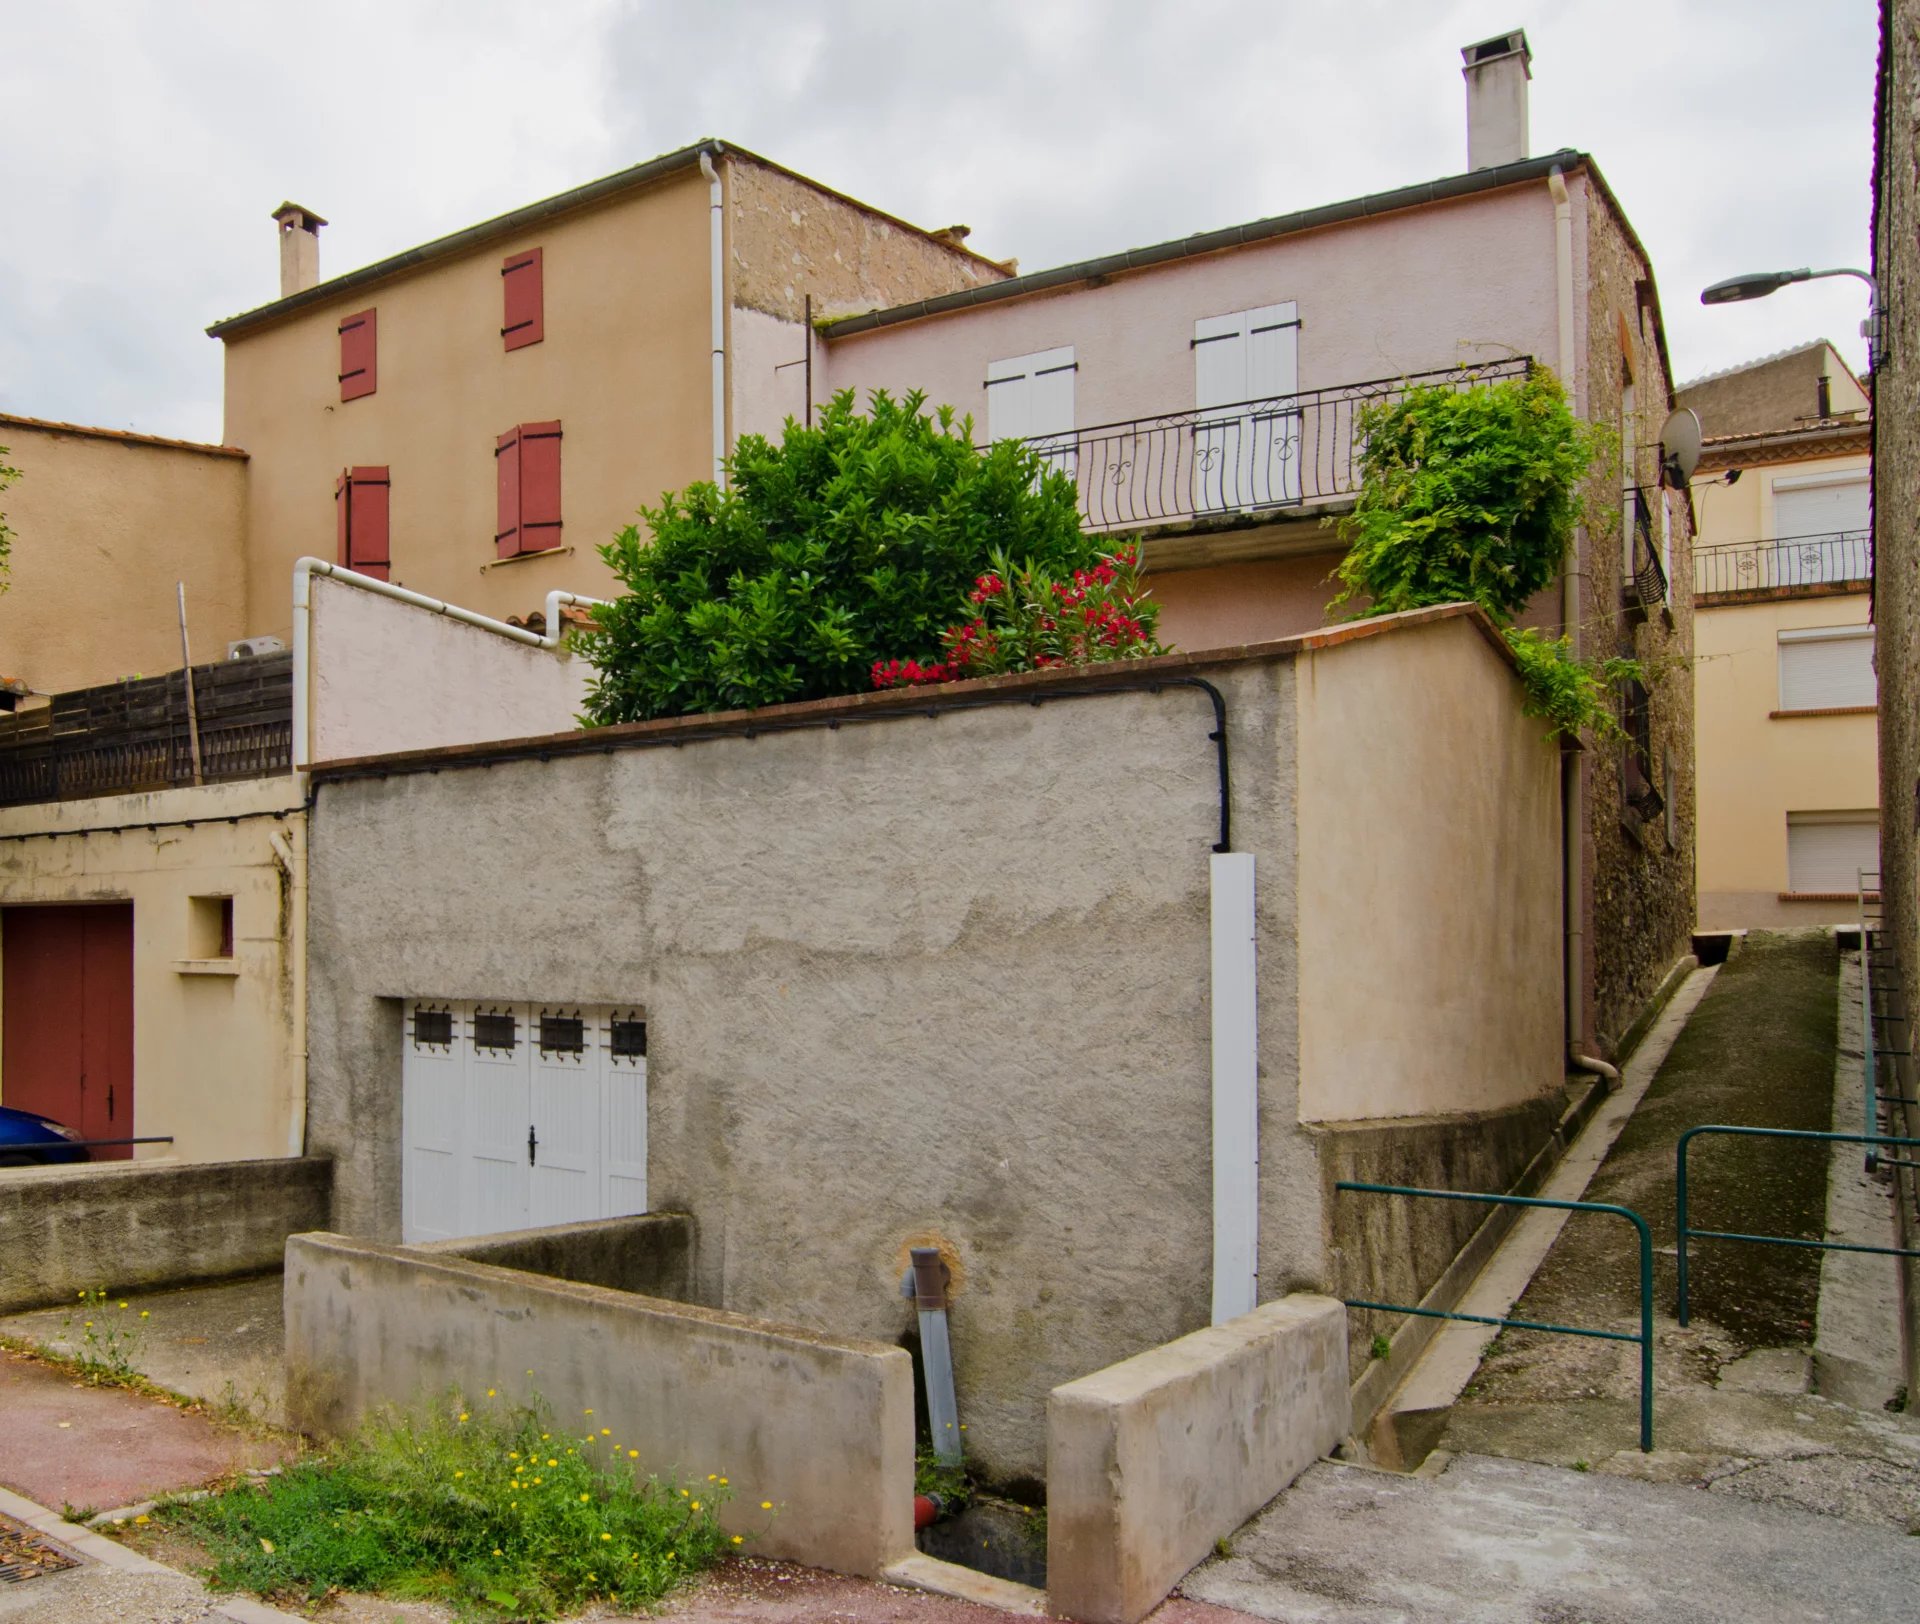 Townhouse in Tautavel, 140 m², 3 bedrooms, 2 bathrooms/toilets, terraces, garage, Vue panoramique.